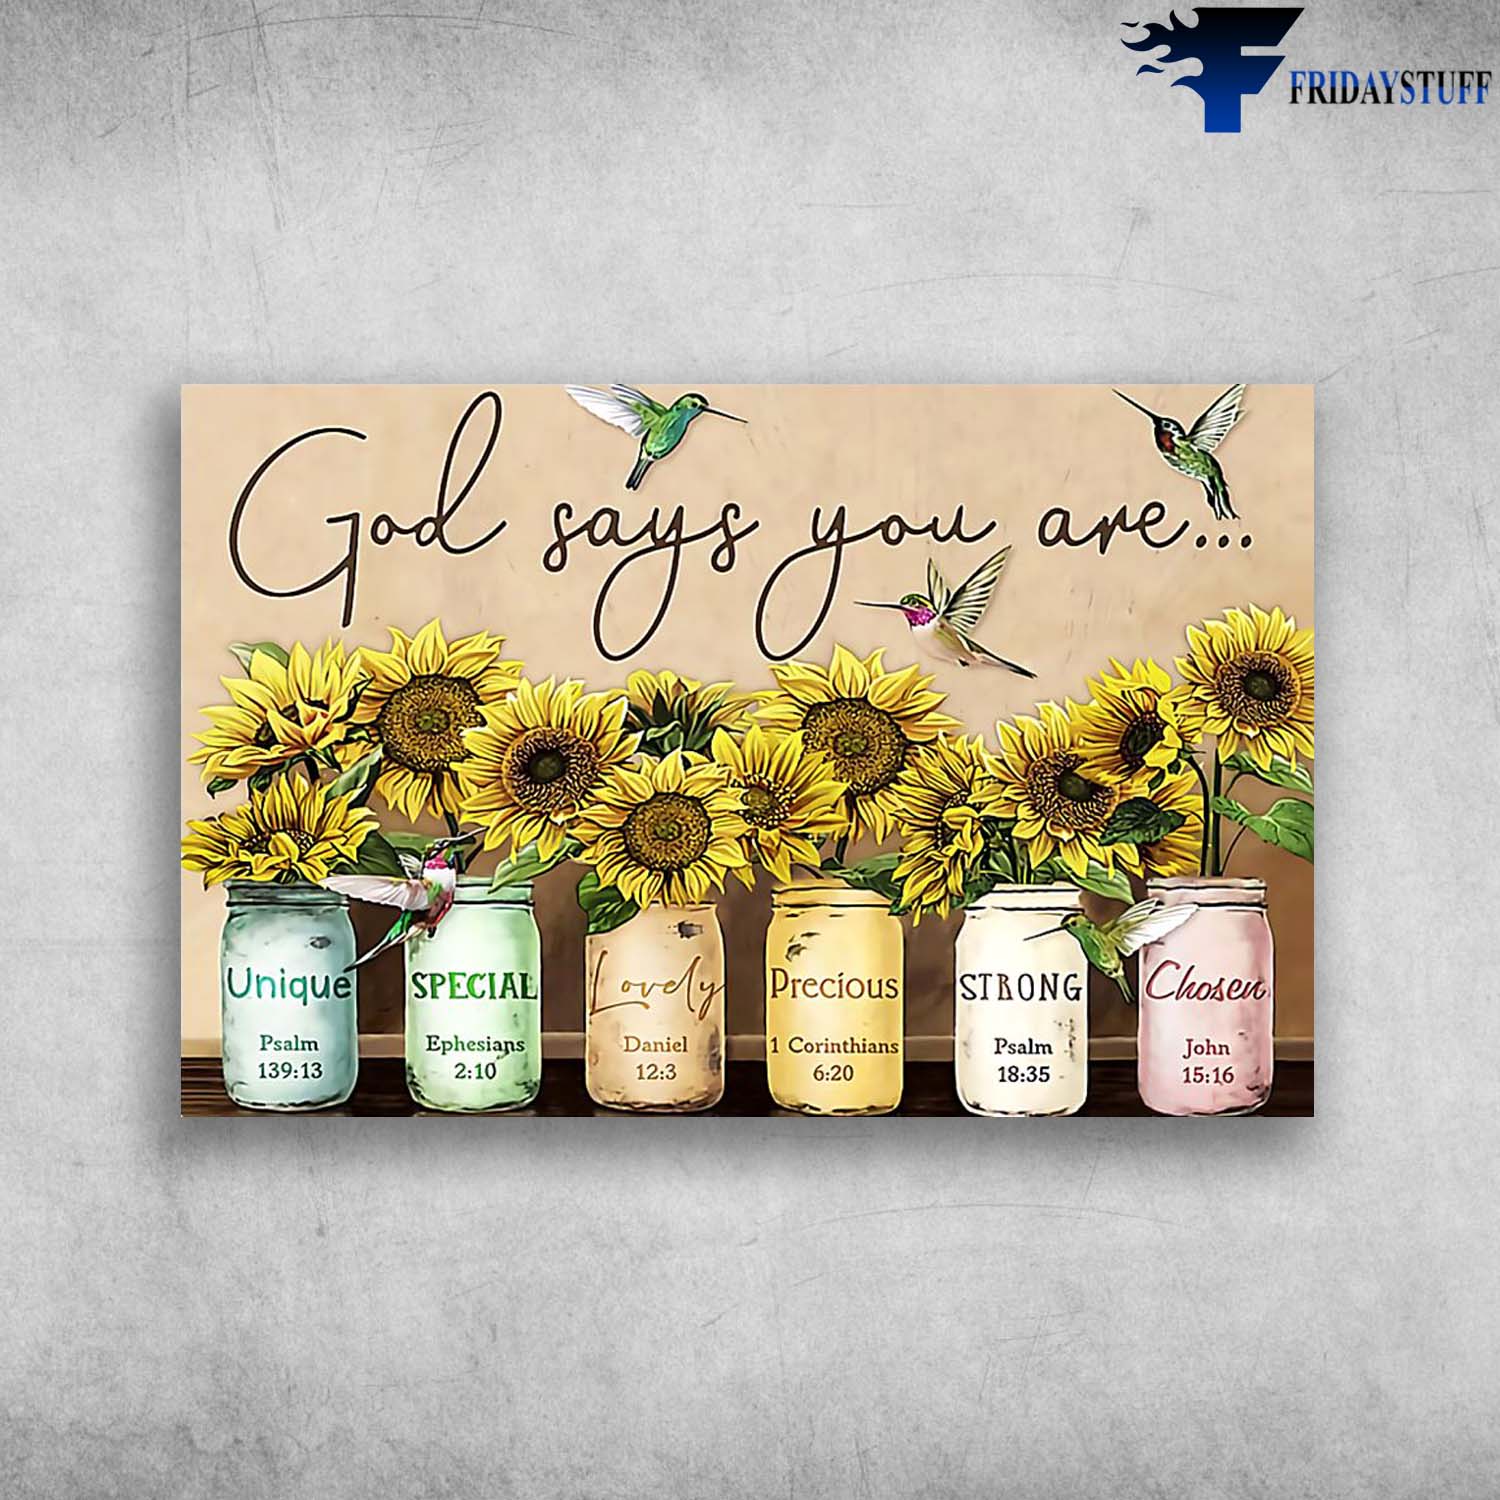 God Says You Are Unique, Special, Lovely, Precious, Strong, Chosen - Sunflowers and hummingbirds